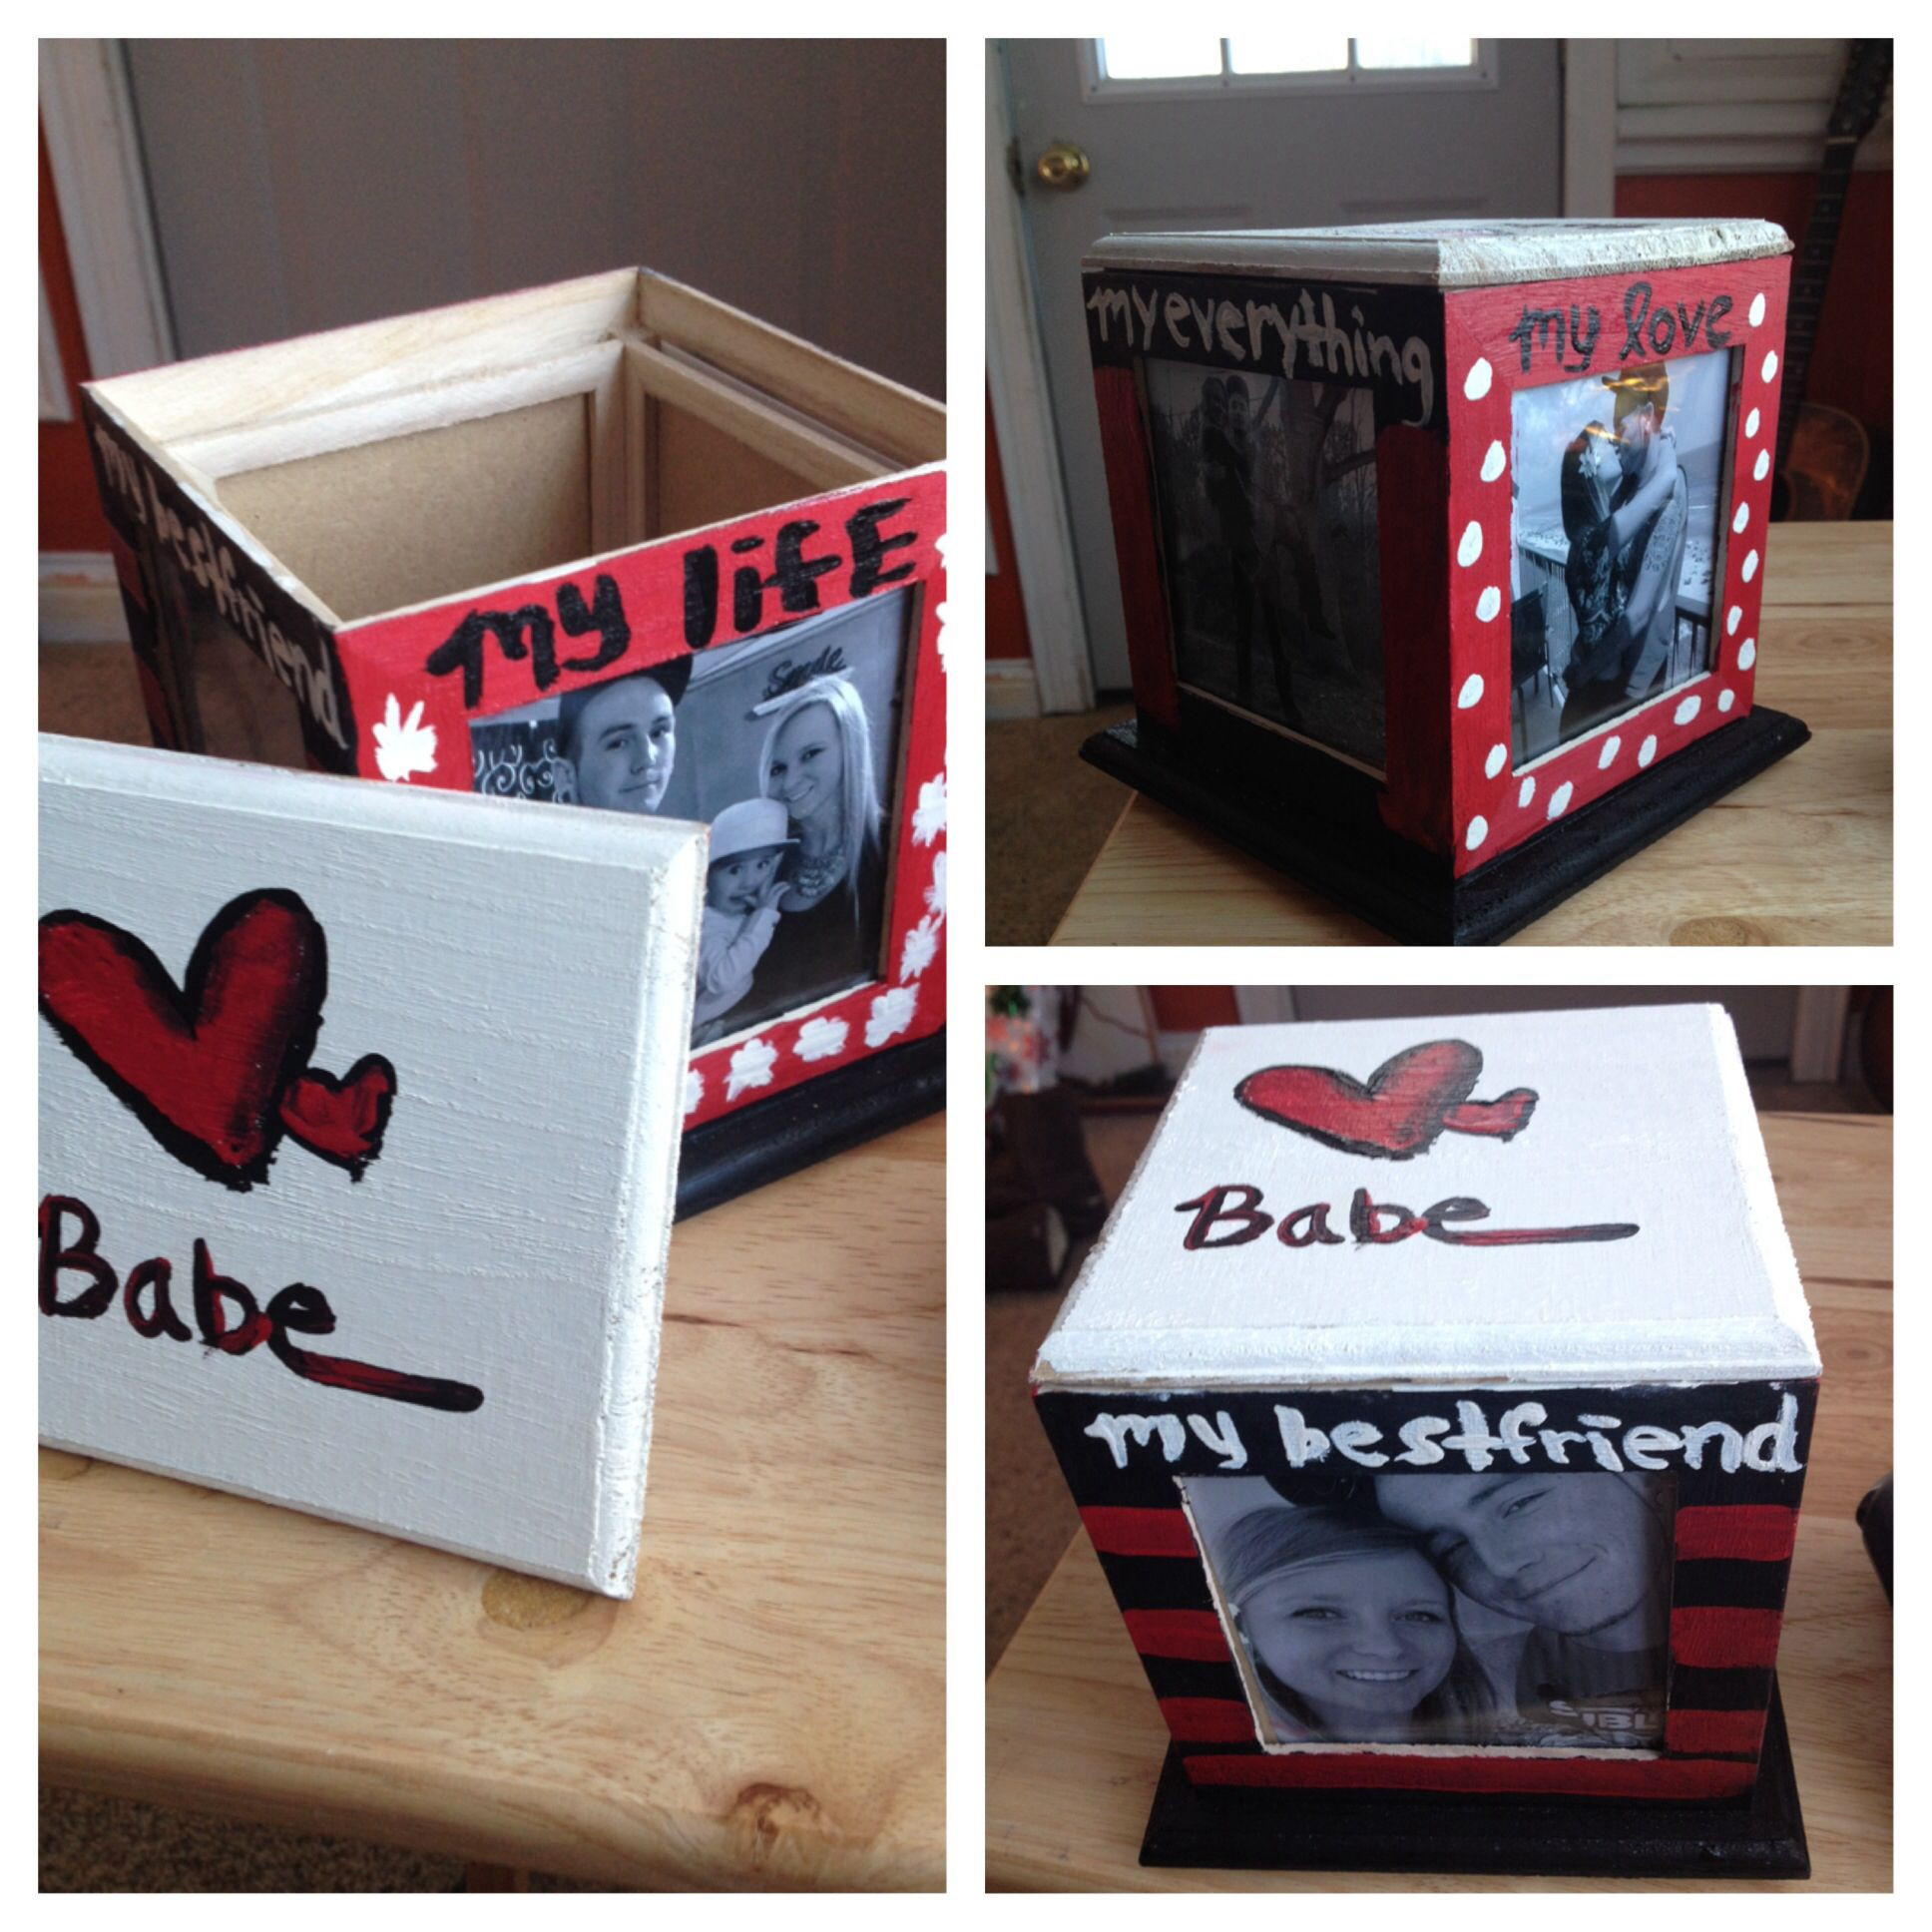 Inexpensive Gift Ideas For Boyfriend
 Cheap DIY present for boyfriend made this for Dan for